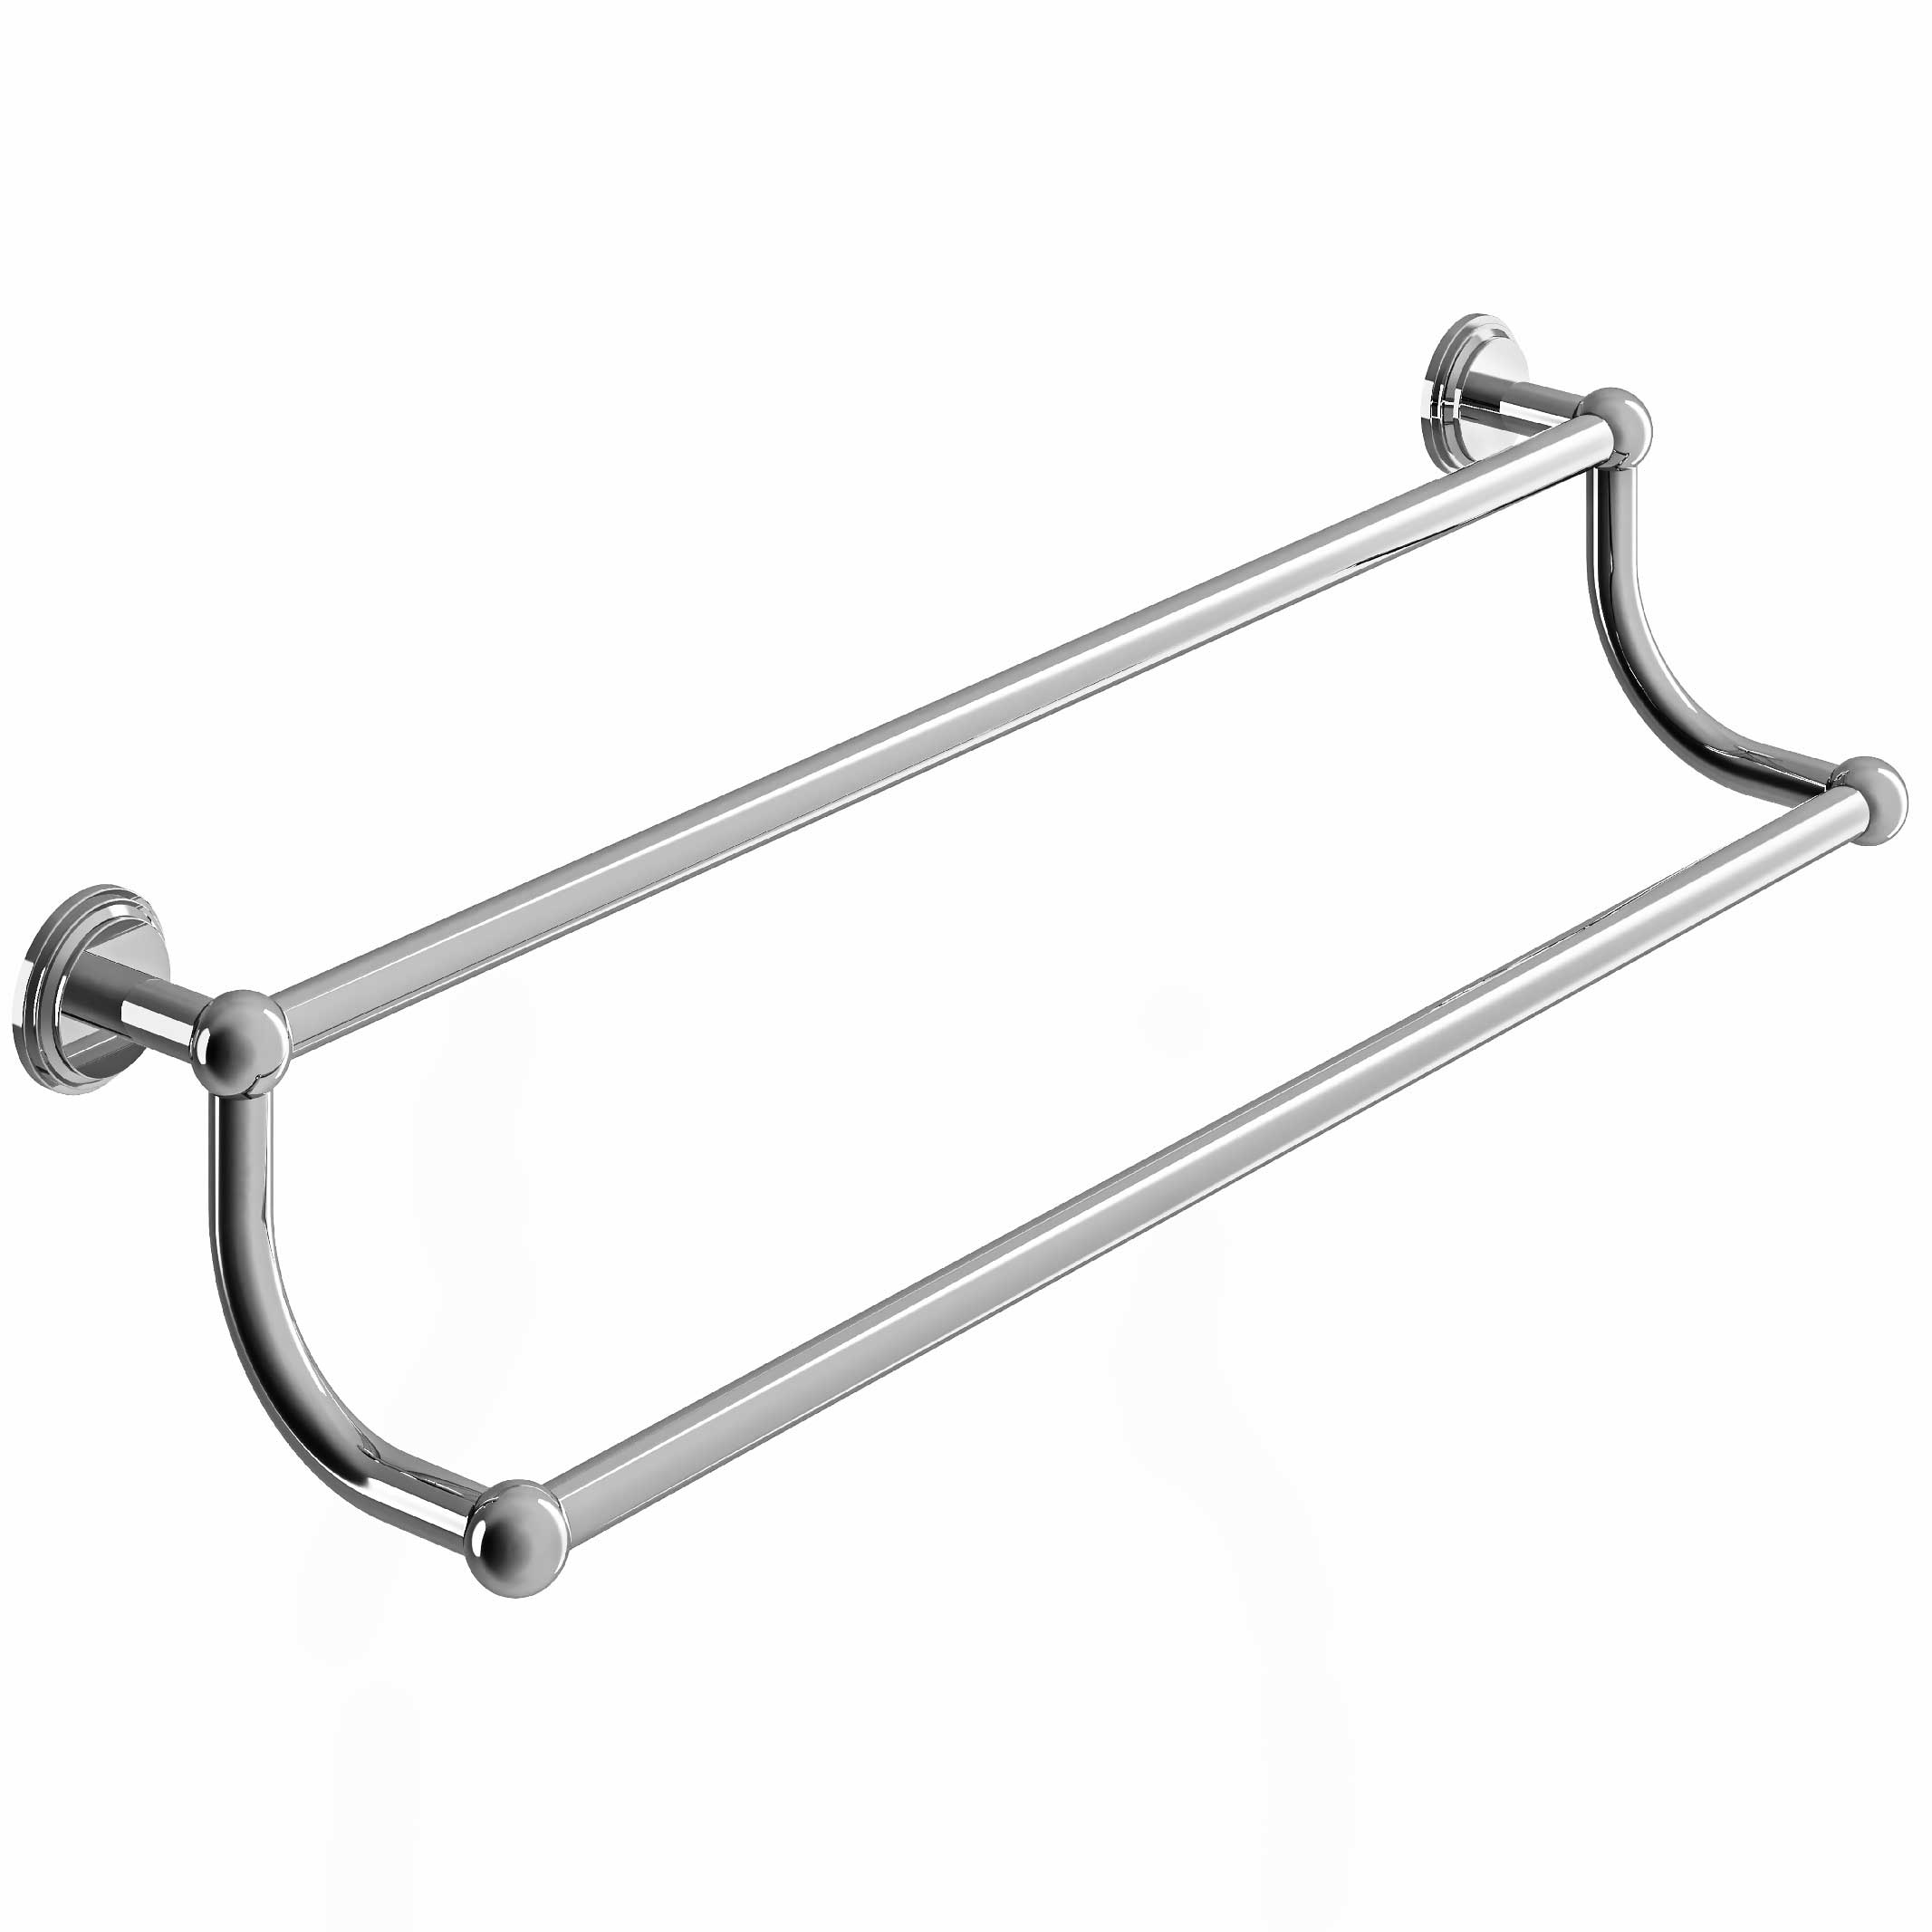 M60-509 Wall mounted double towel bar